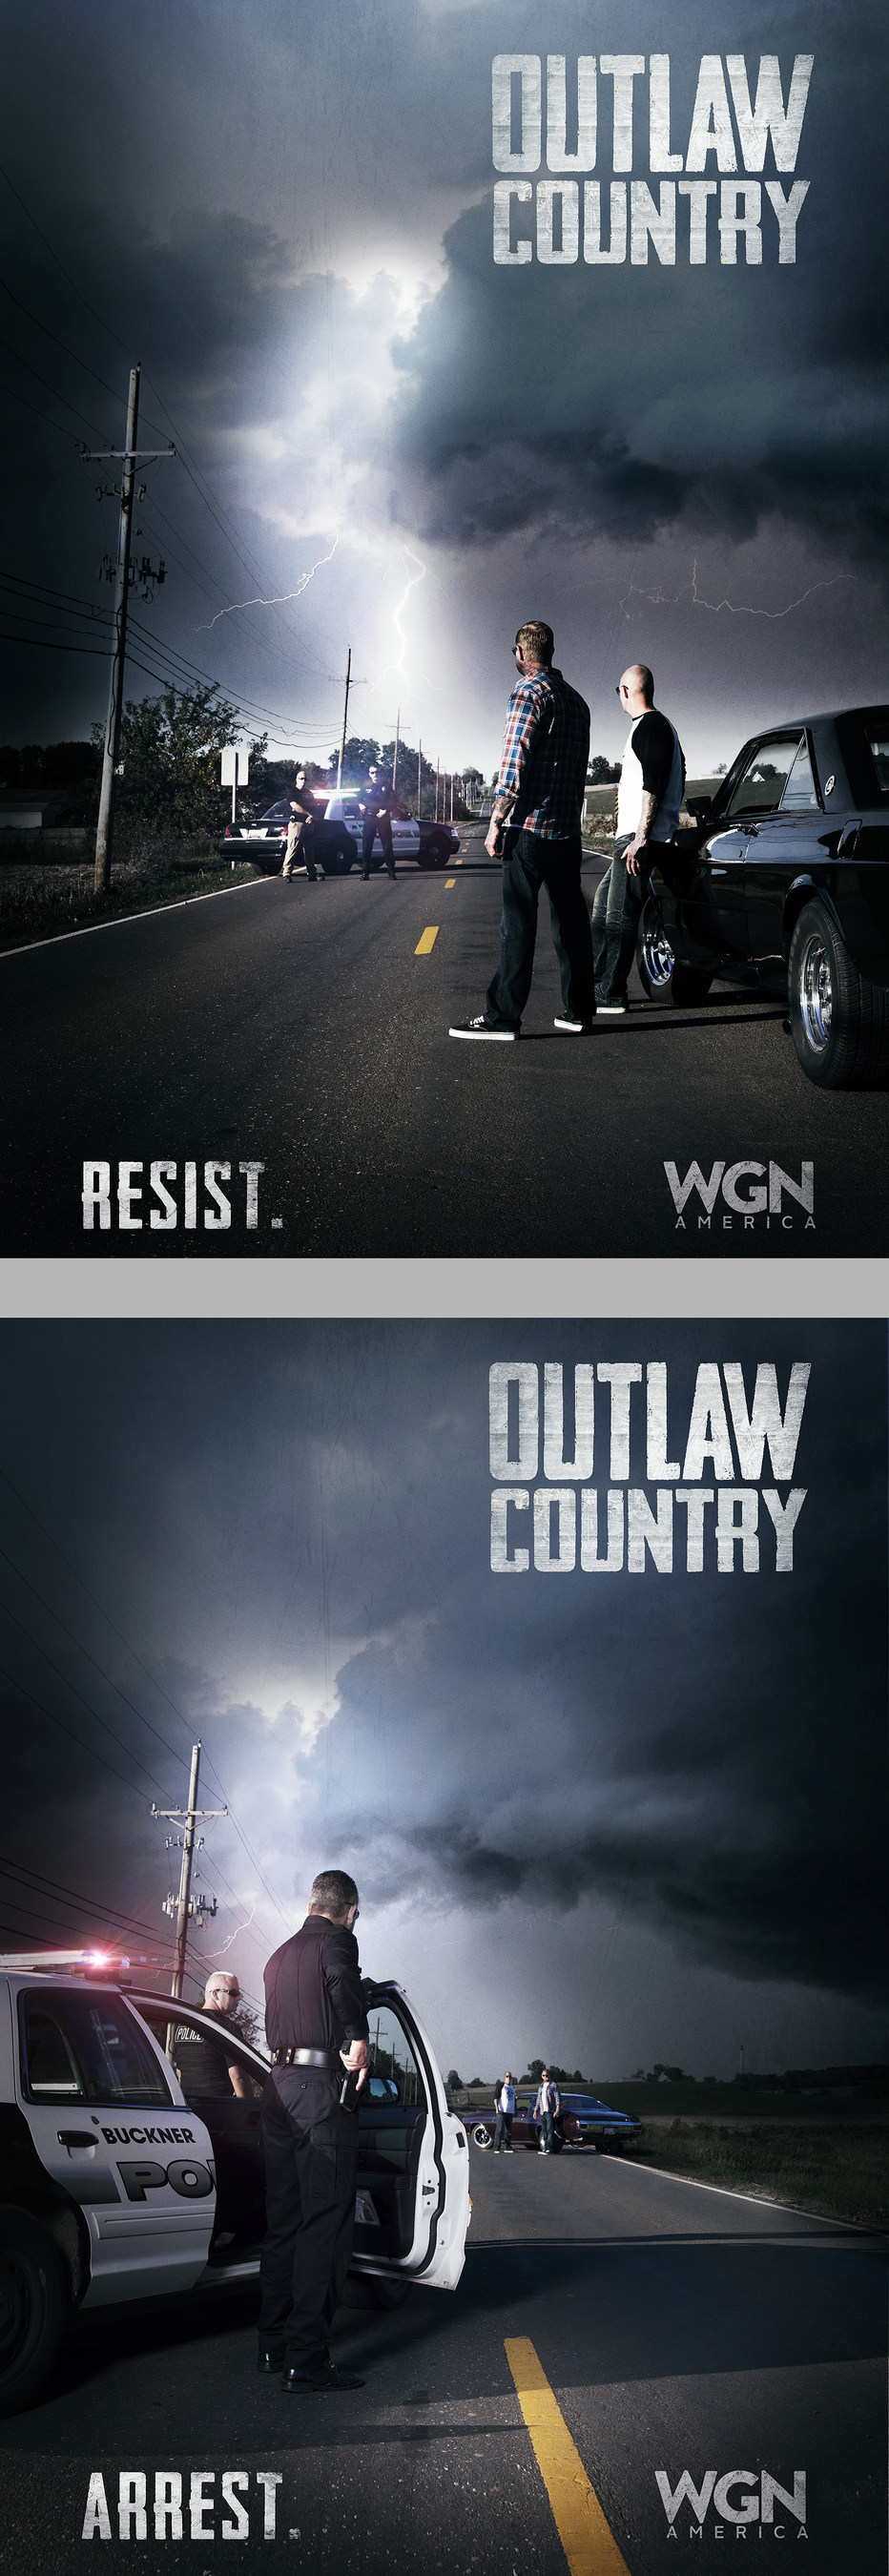 WGN America's "Outlaw Country" premieres Tuesday, February 24 (10 p.m. ET / 9 p.m. CT).